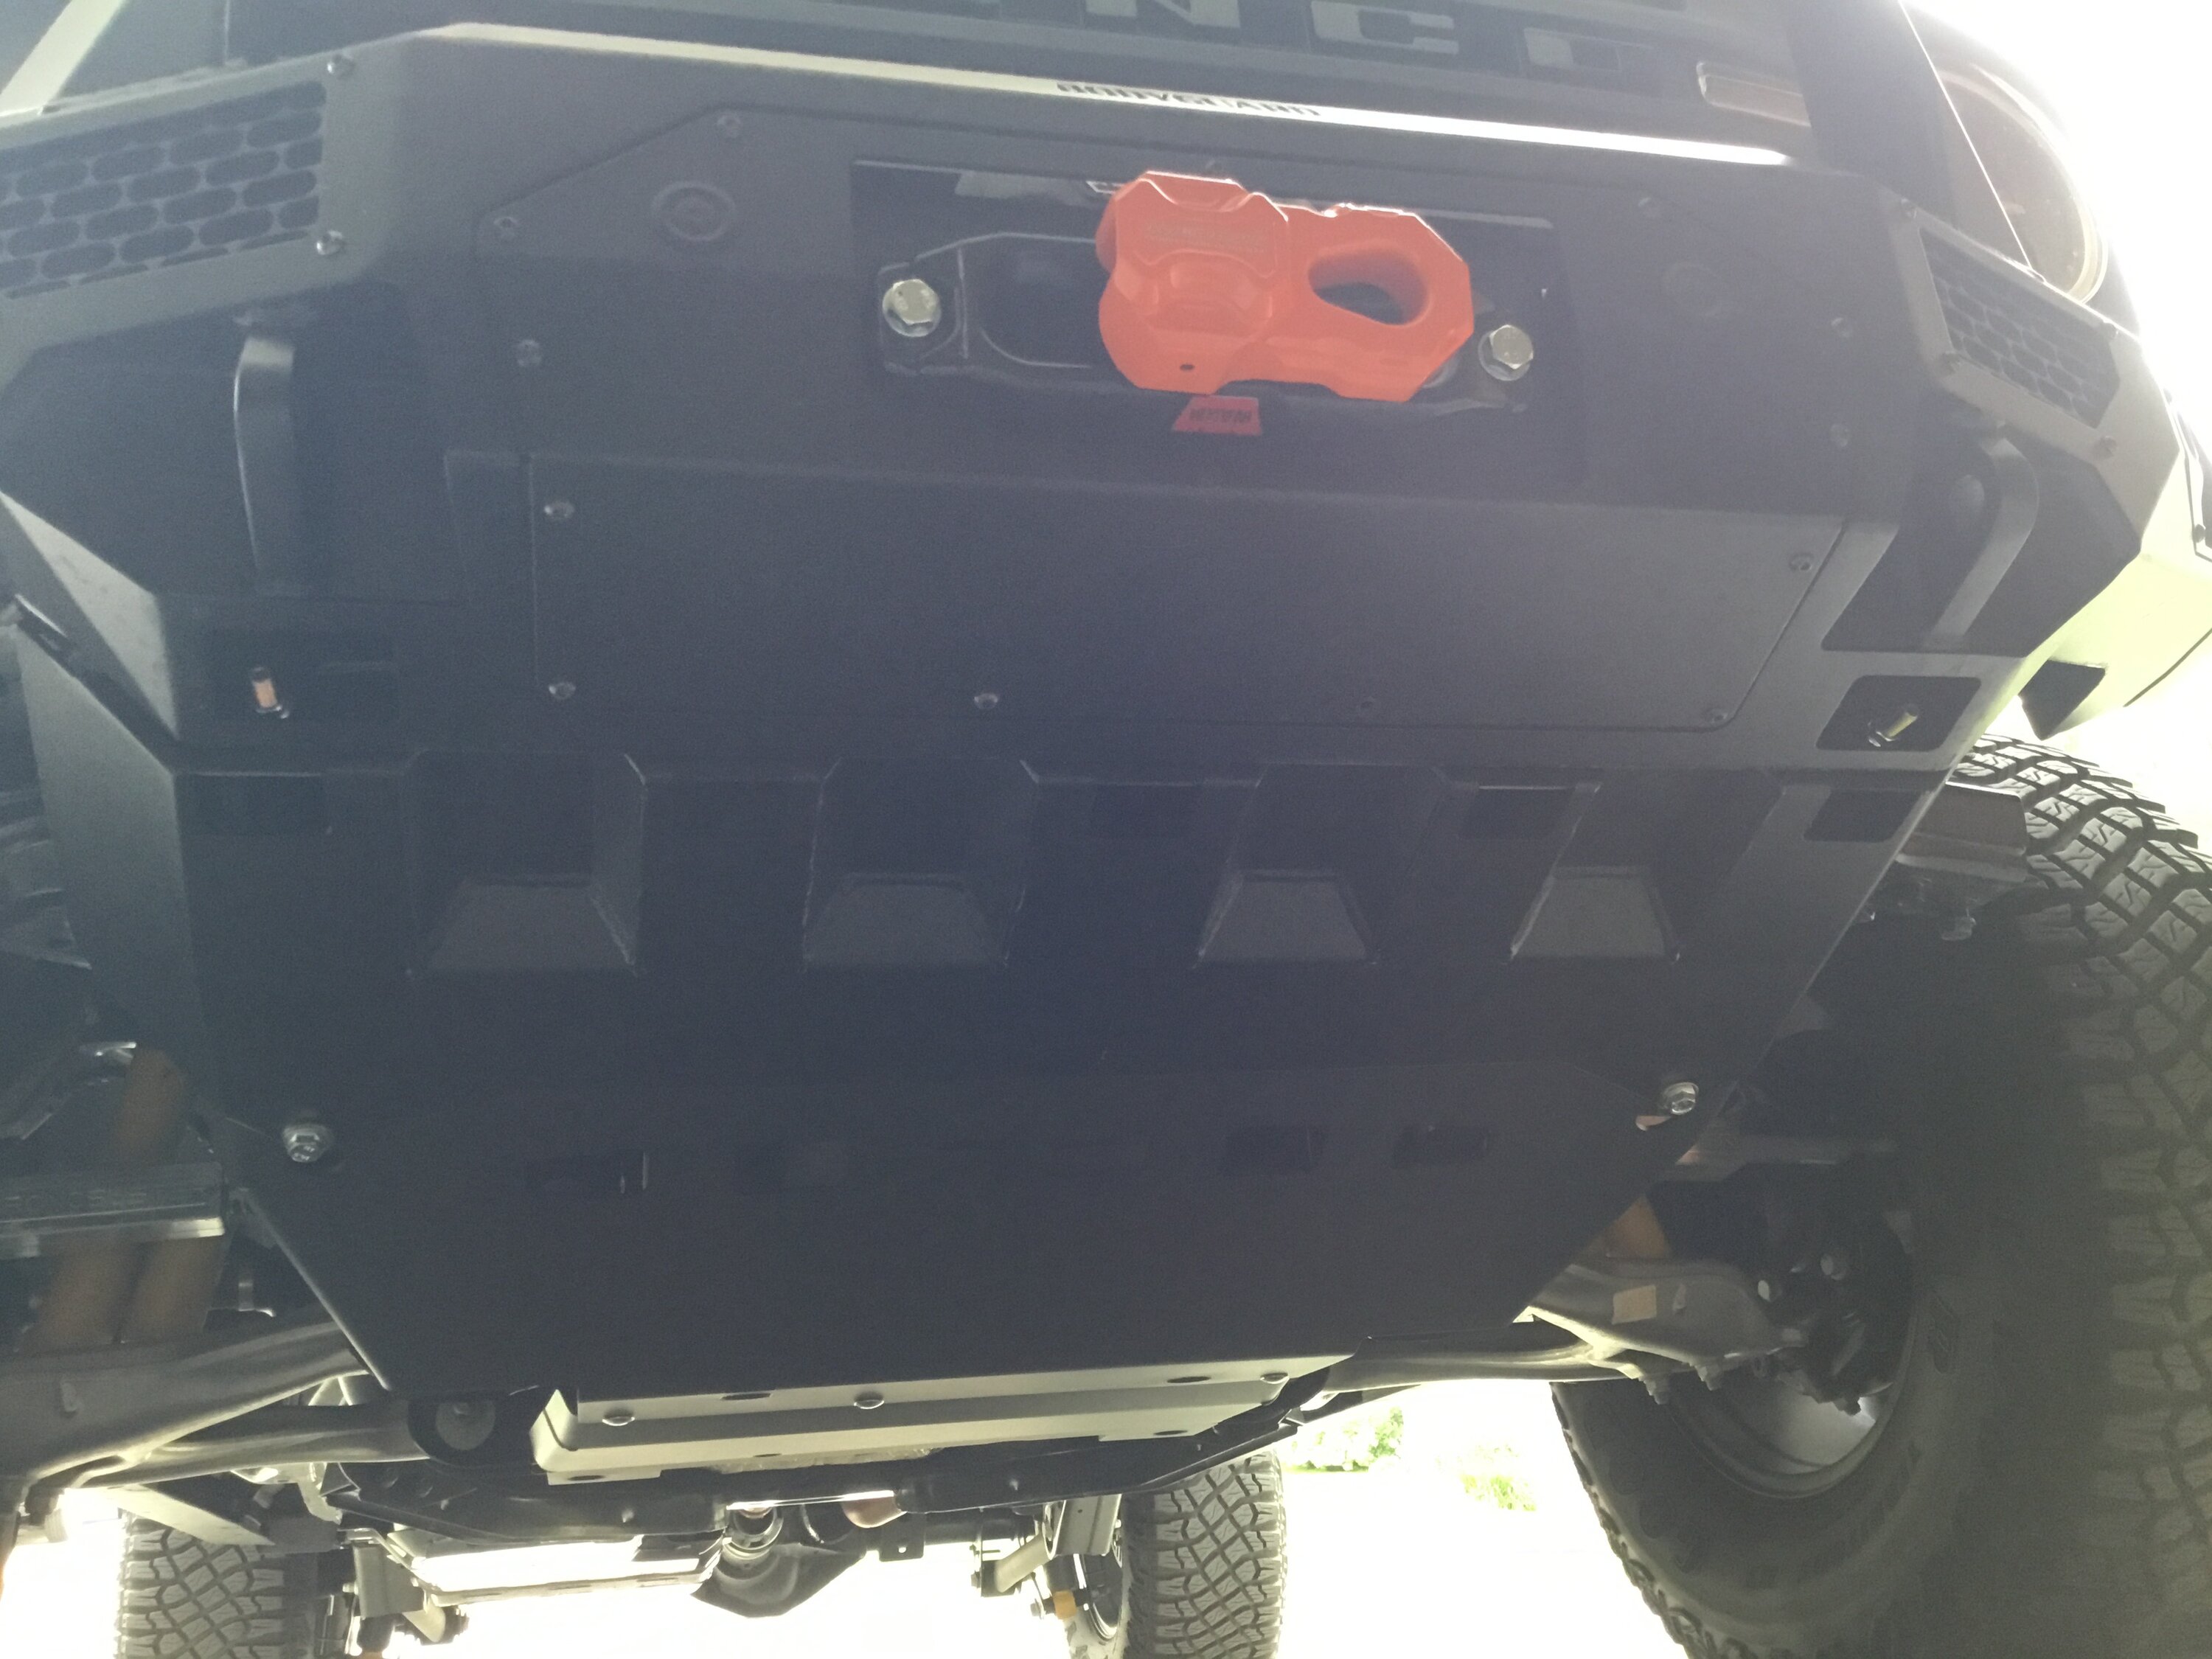 Ford Bronco DIY Lessons re-learned - RCI engine skid plates installation image